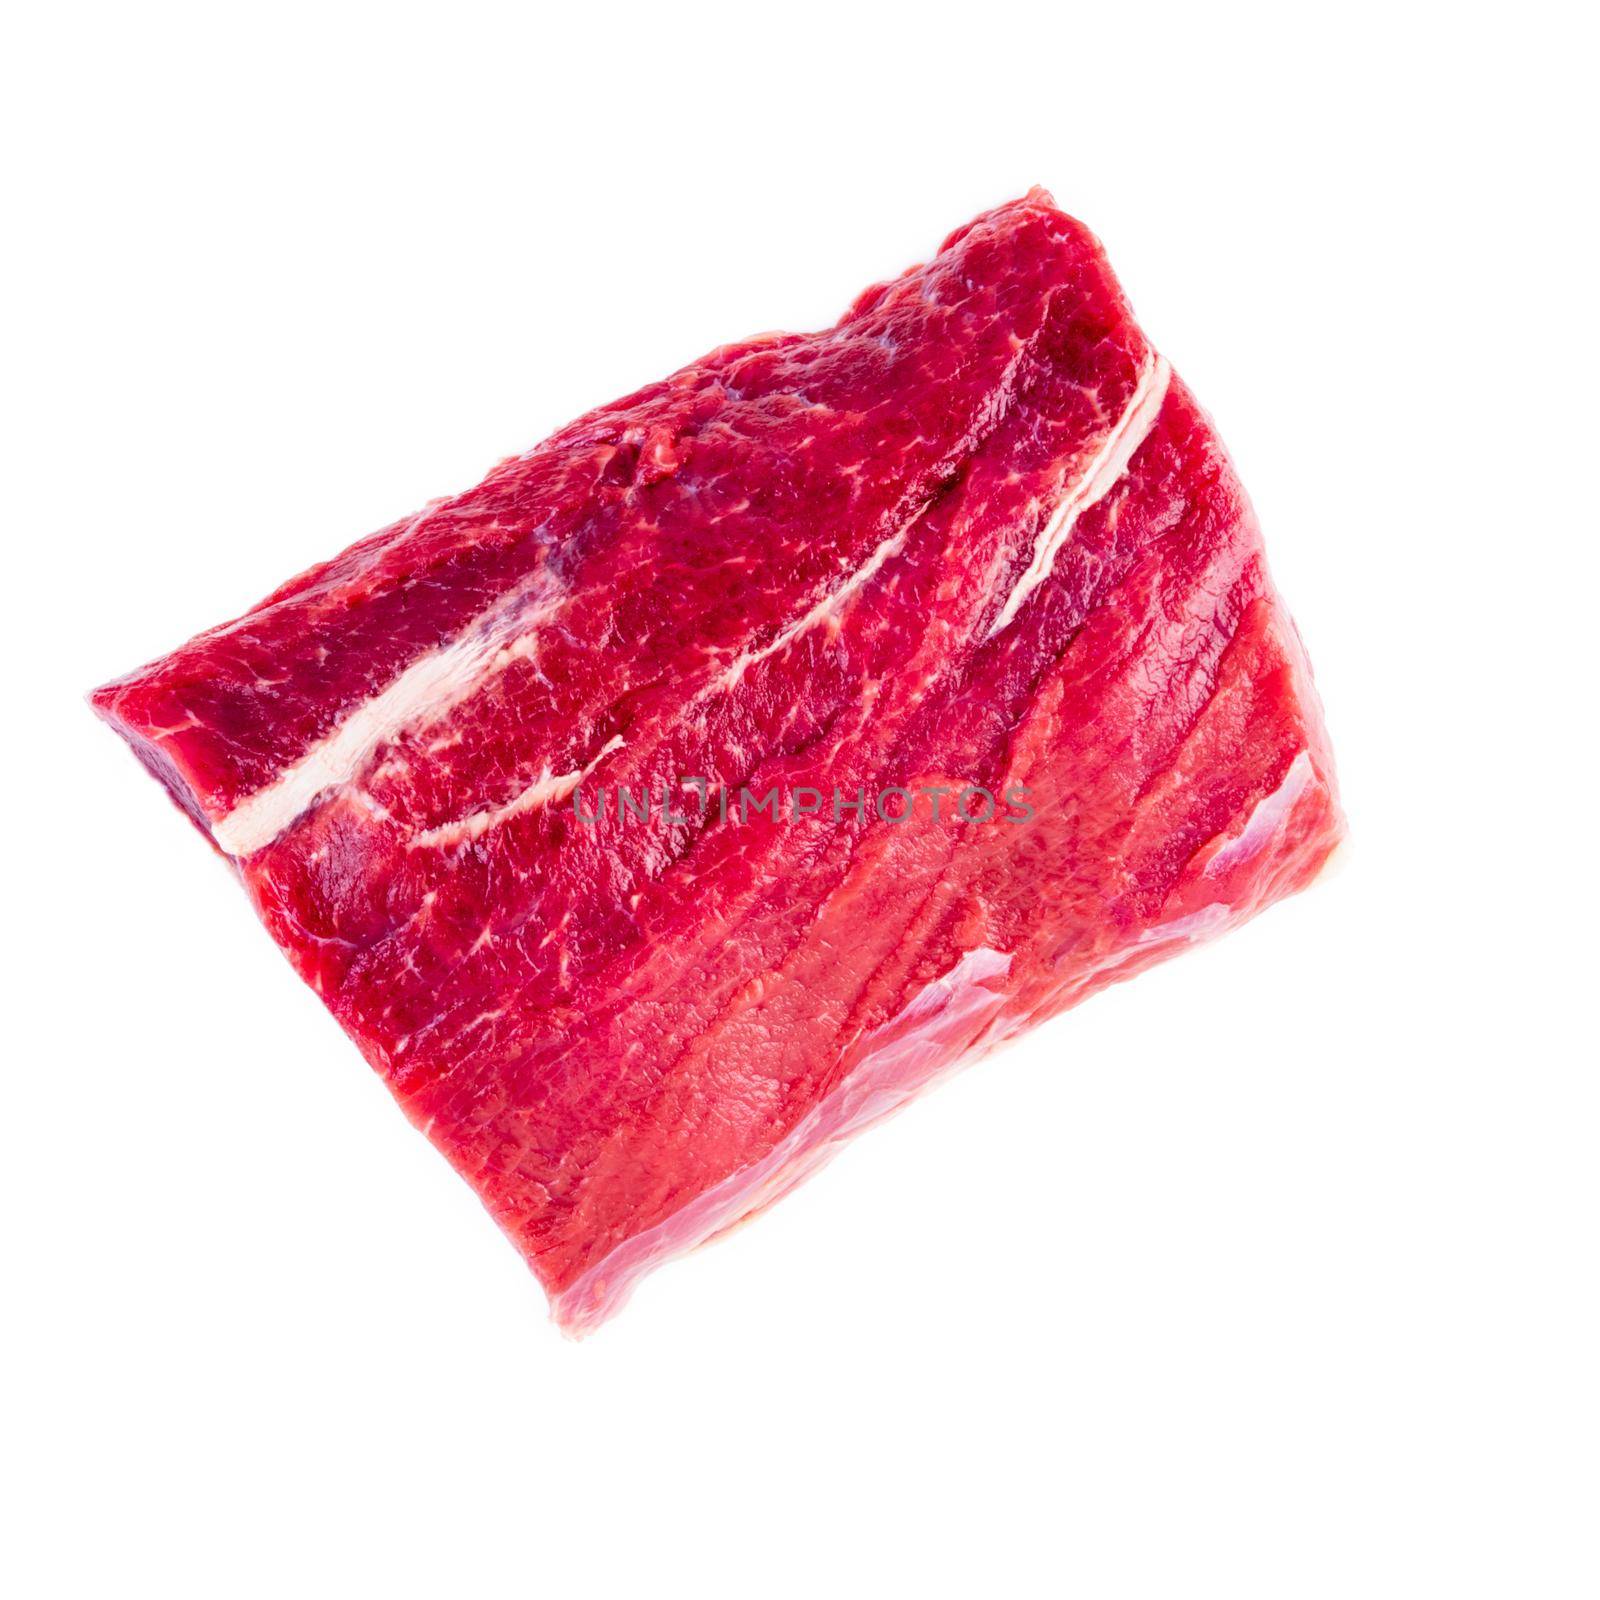 large piece of meat, raw beef fillet isolated on white background. Striploin, top view.